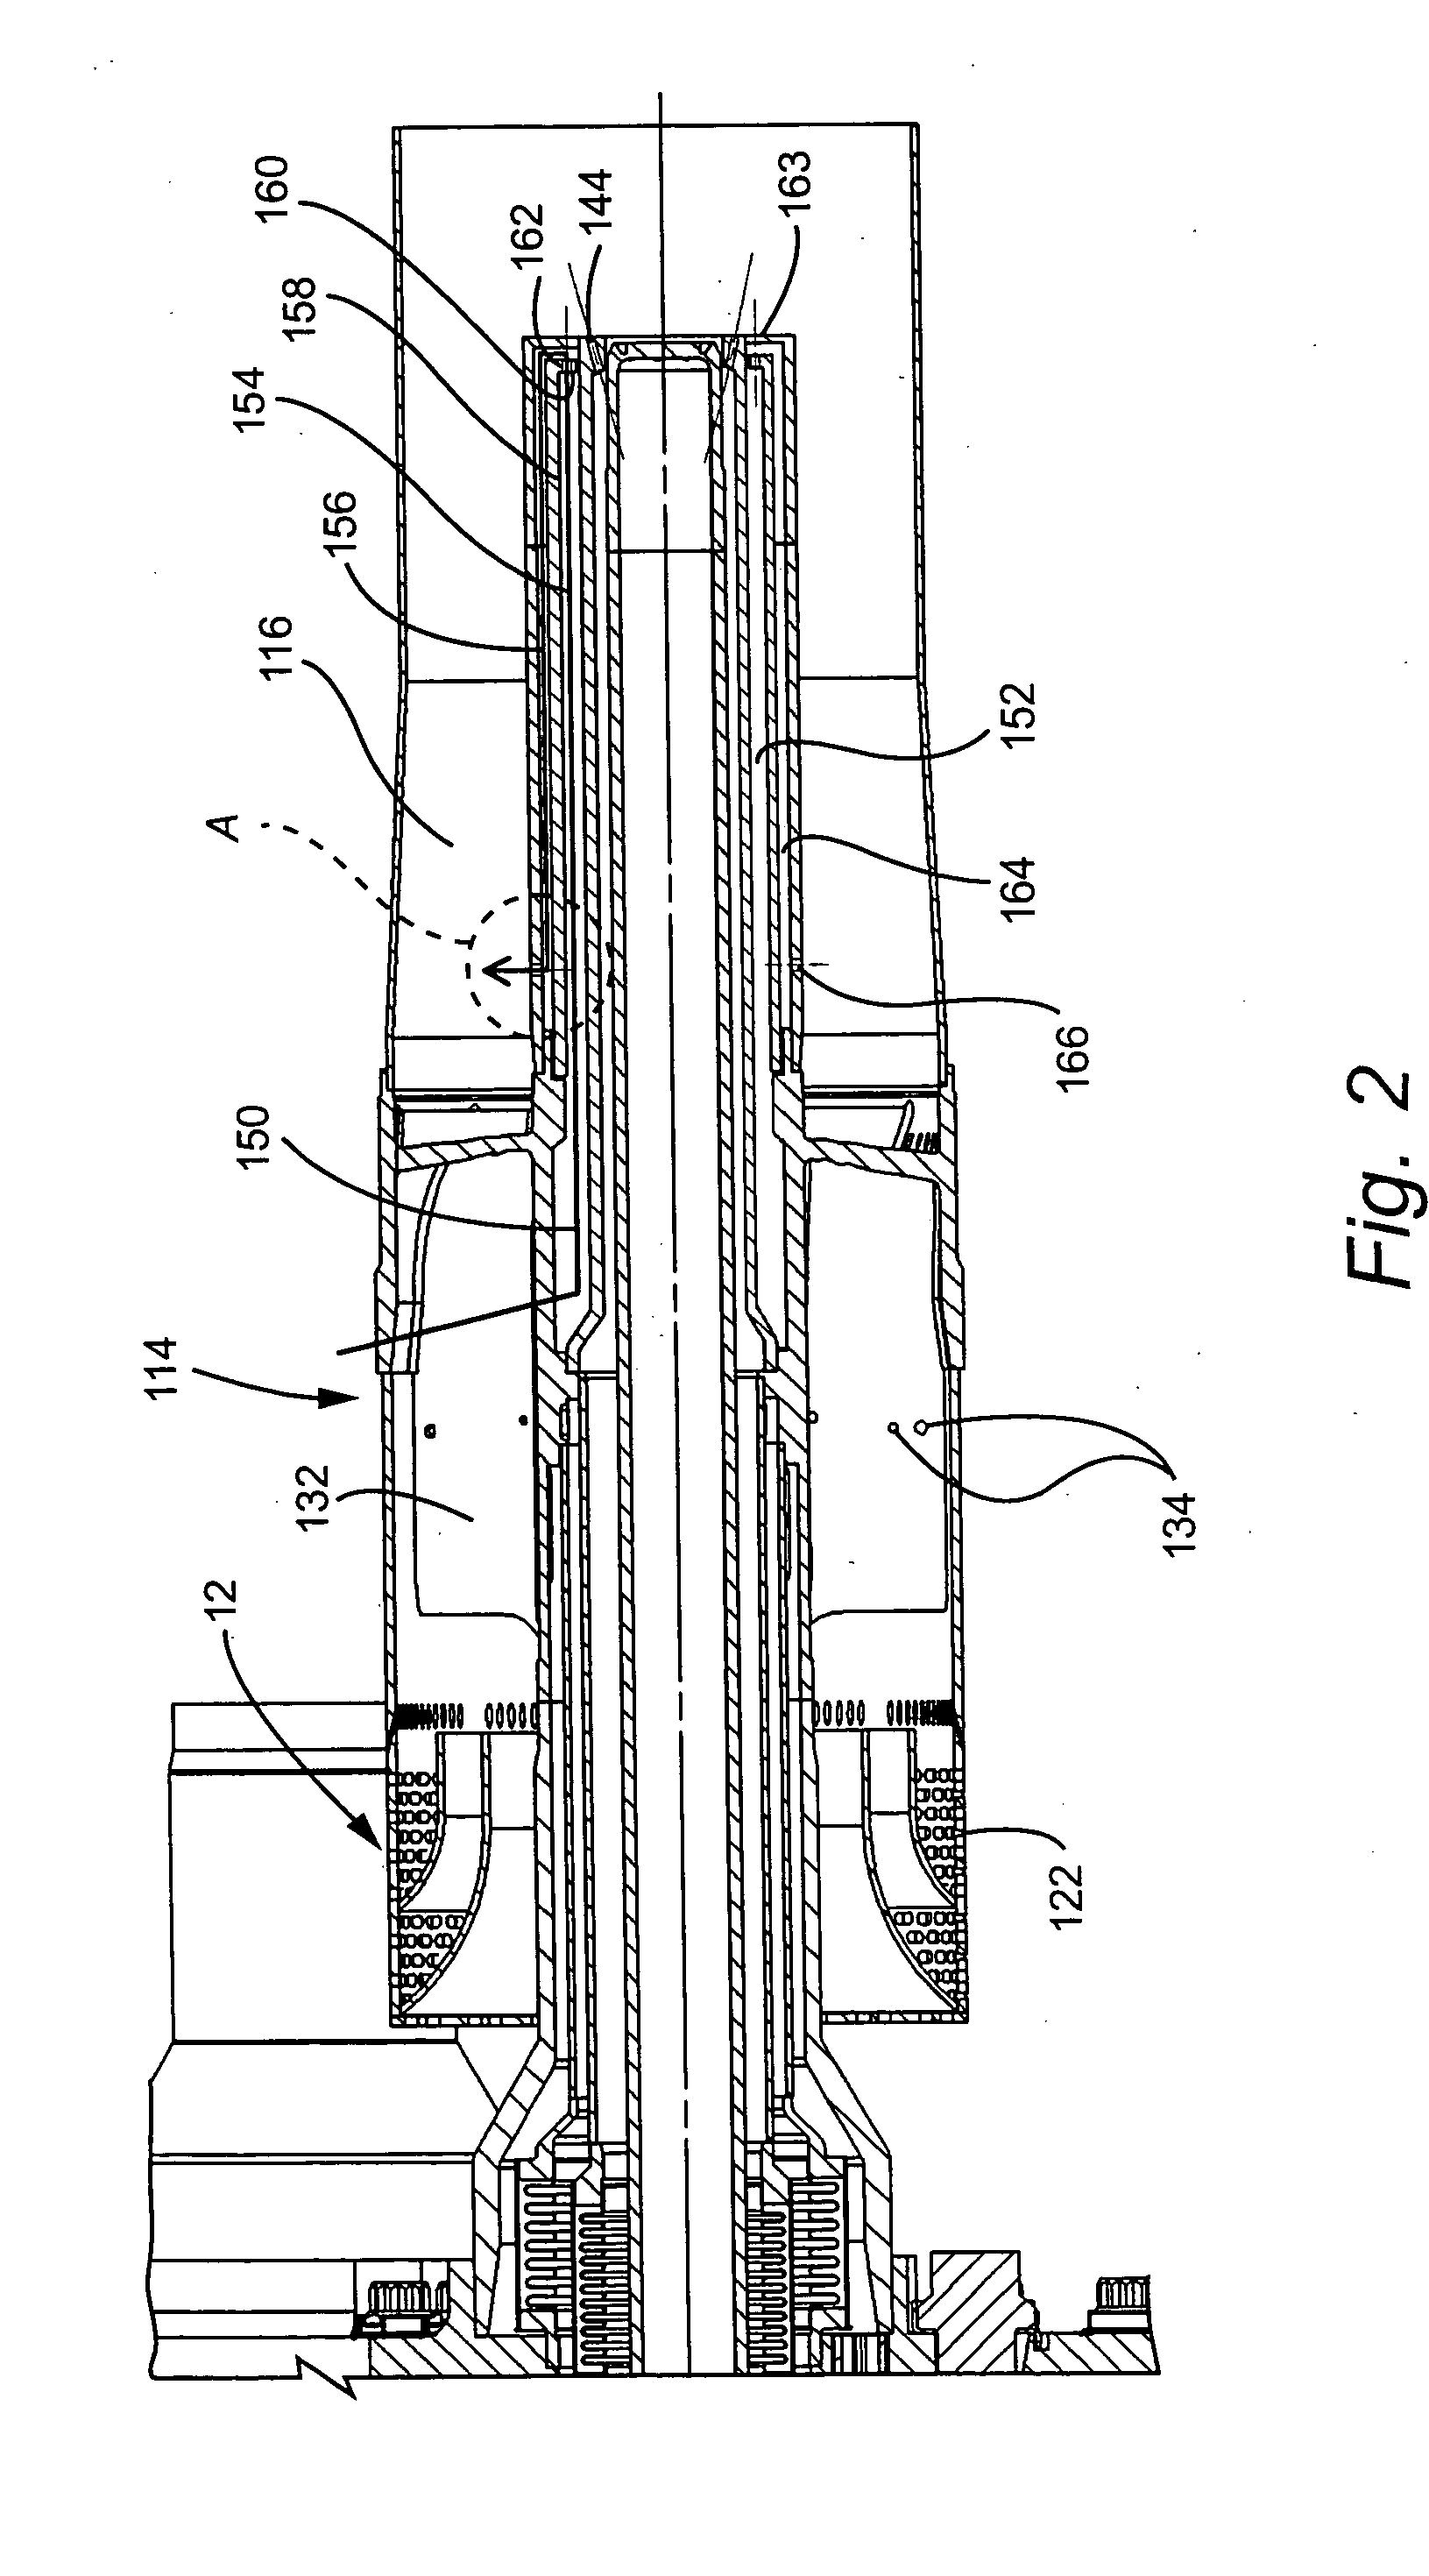 Premixing burner with impingement cooled centerbody and method of cooling centerbody